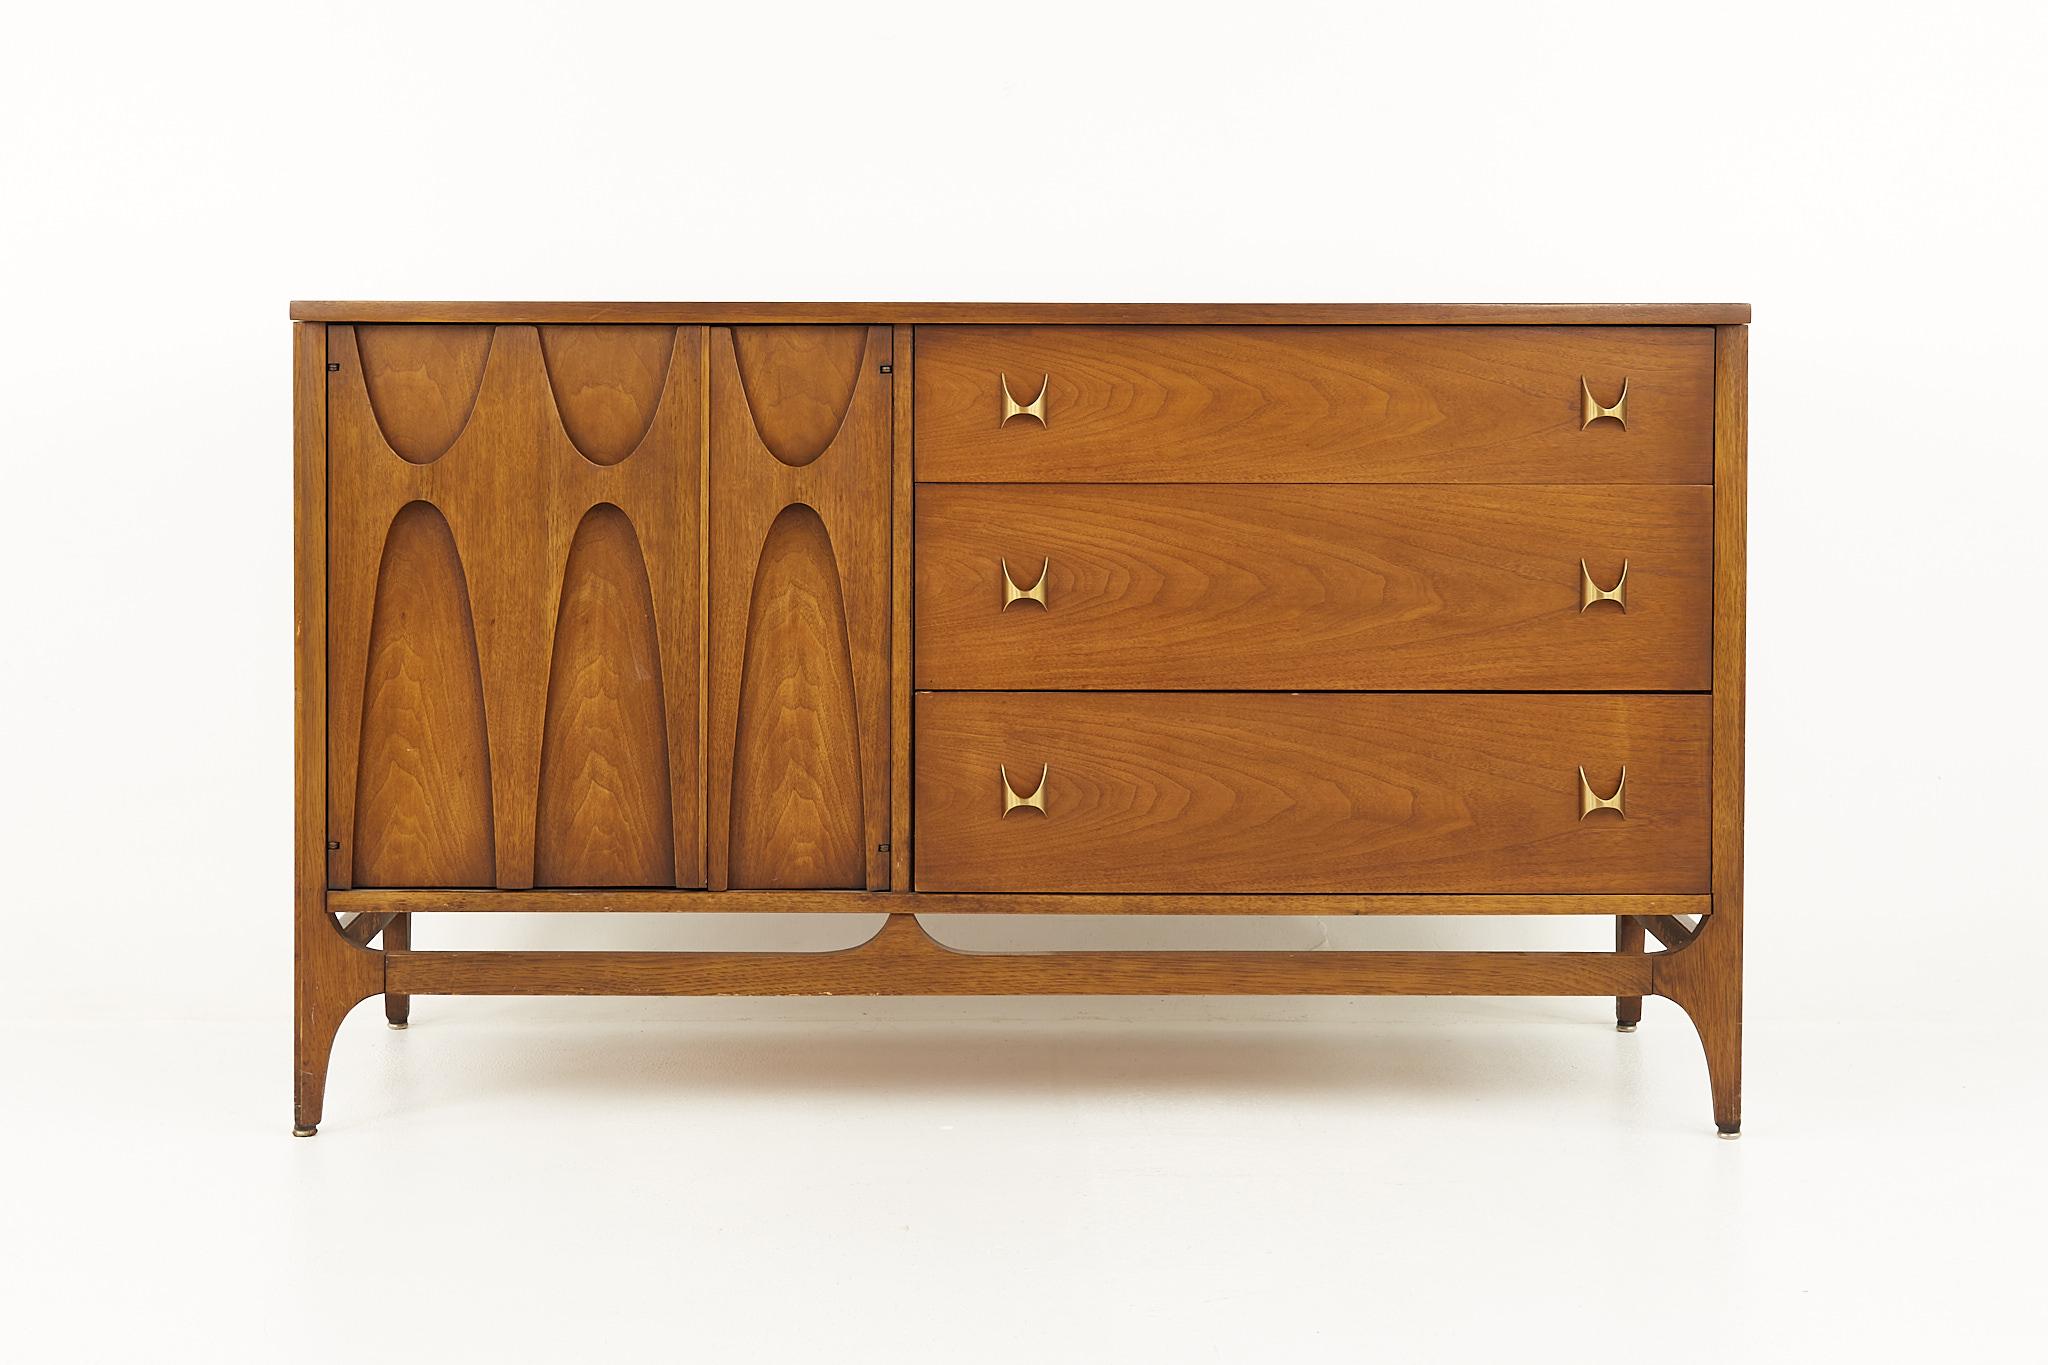 Broyhill Brasilia Mid Century offset door sideboard credenza

This credenza measures: 54.25 wide x 19.25 deep x 31 inches high

All pieces of furniture can be had in what we call restored vintage condition. That means the piece is restored upon